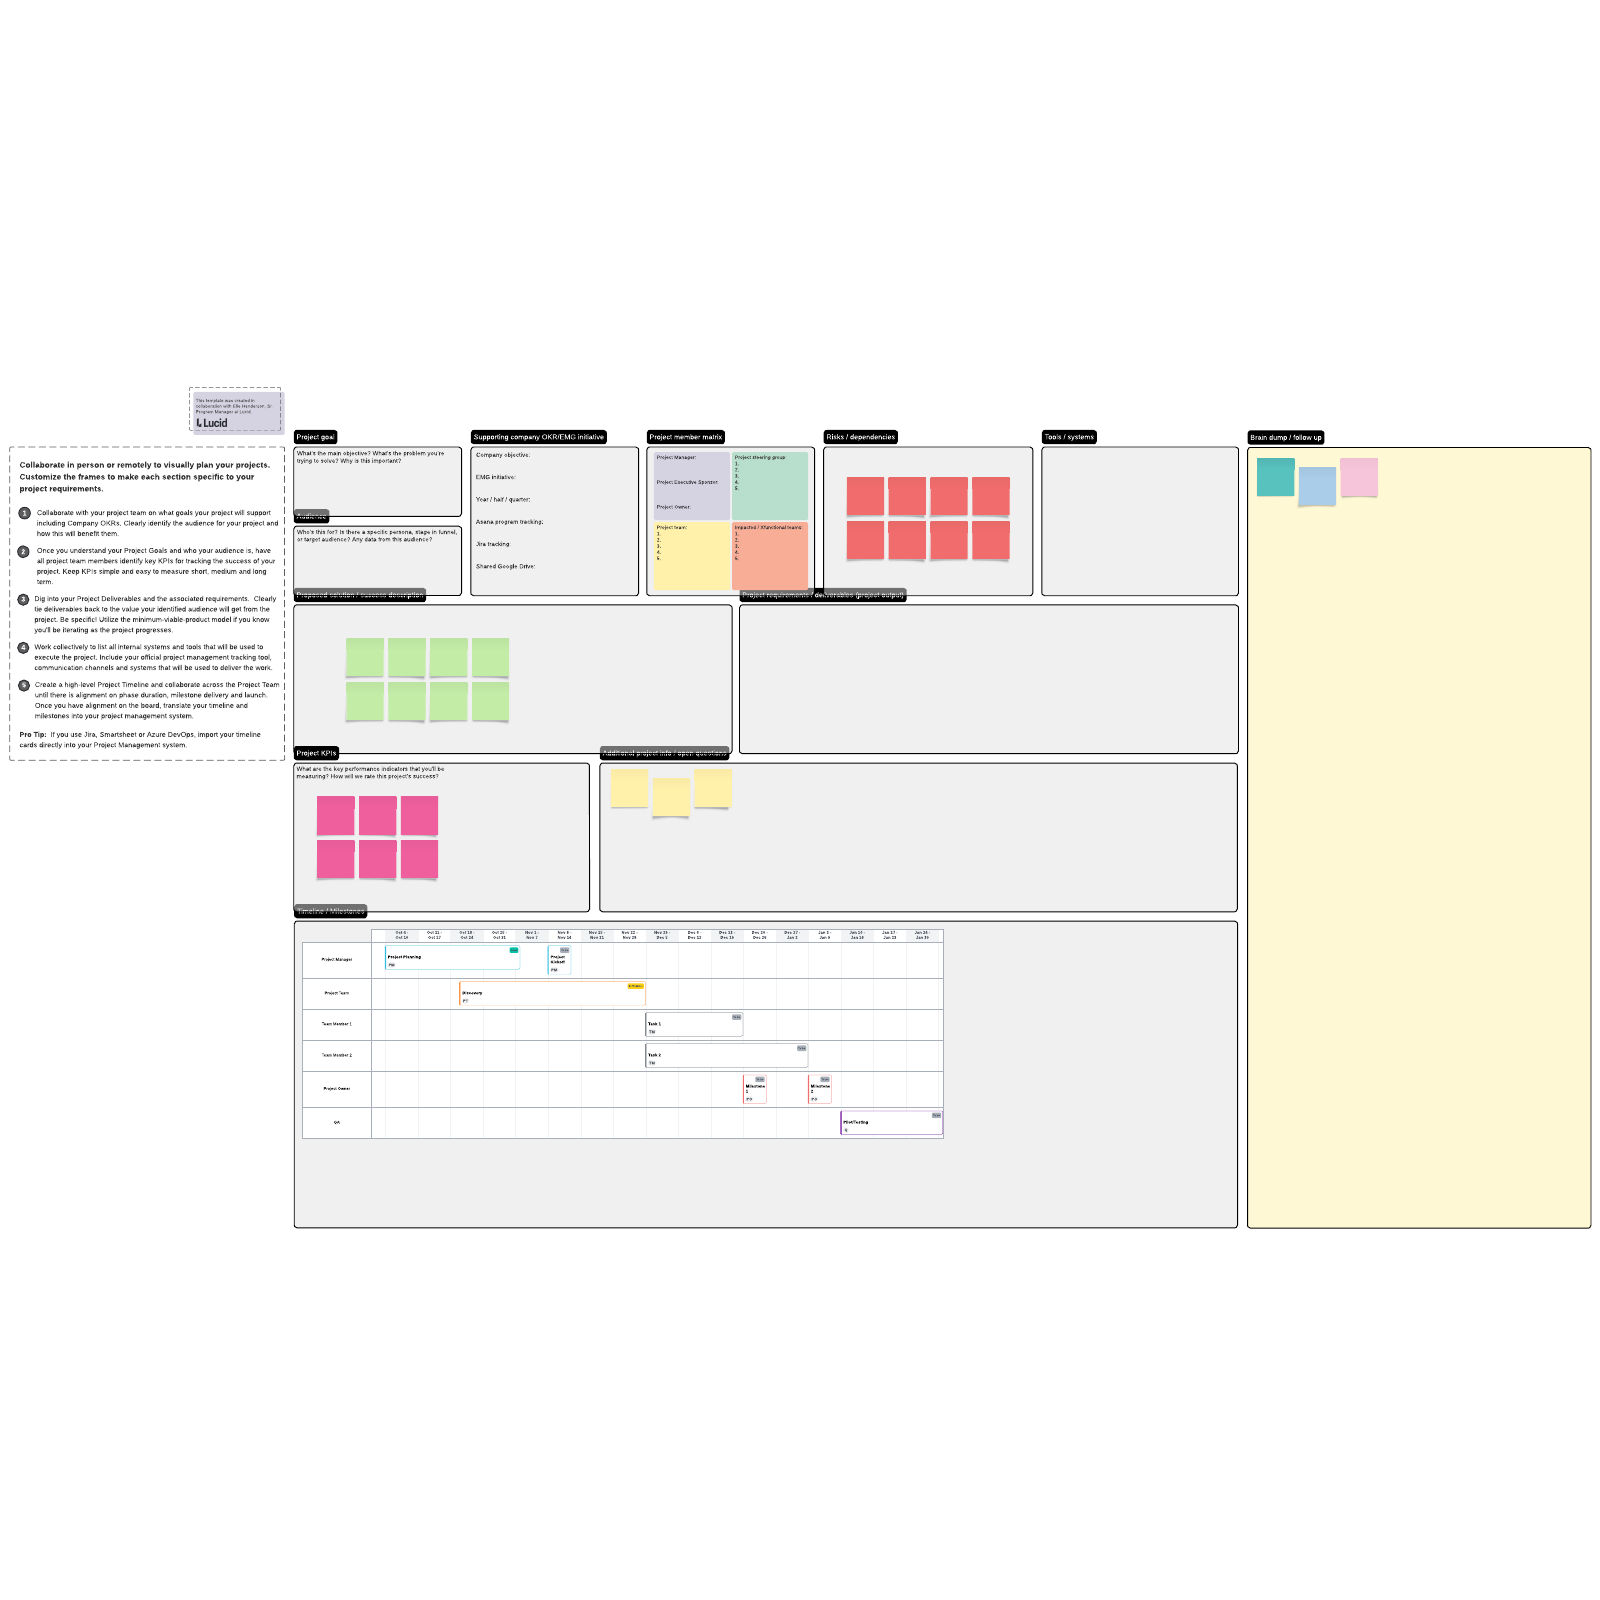 Project planning canvas template